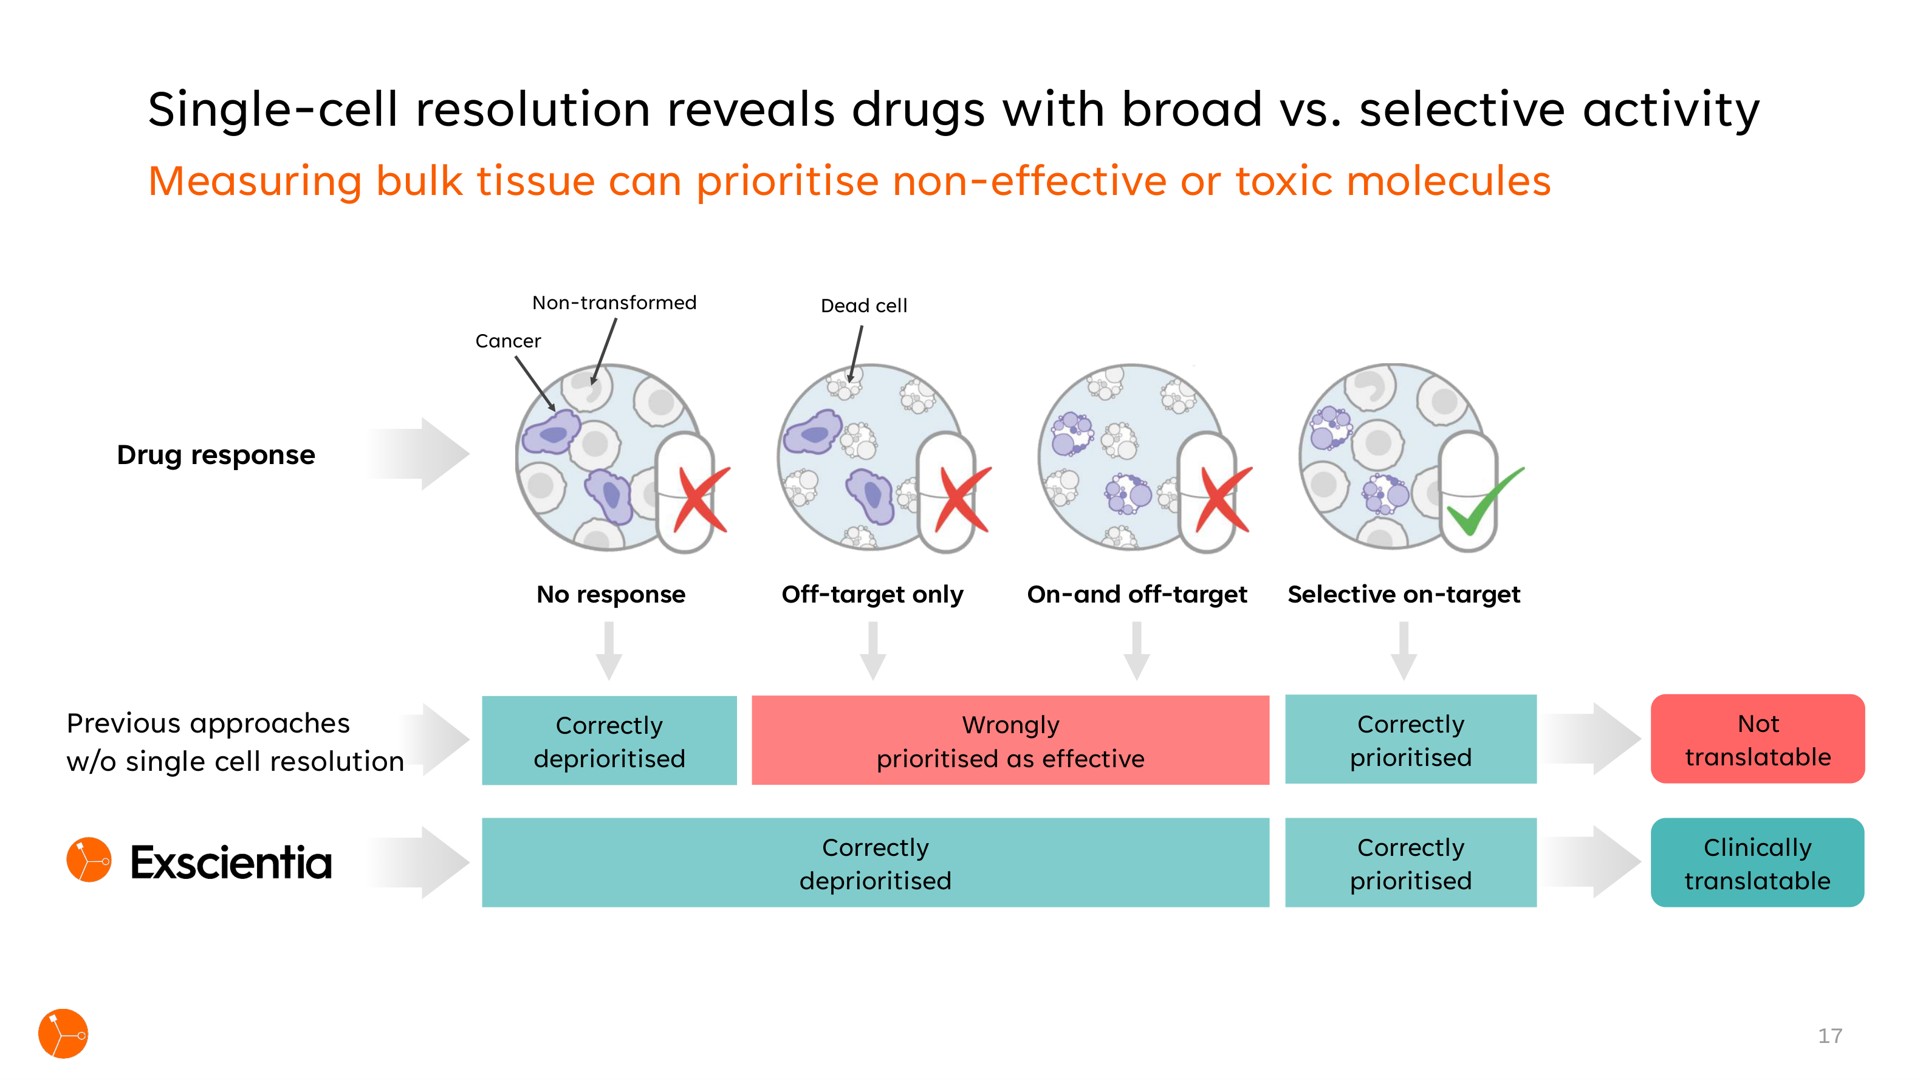 single cell resolution reveals drugs with broad selective activity | Exscientia